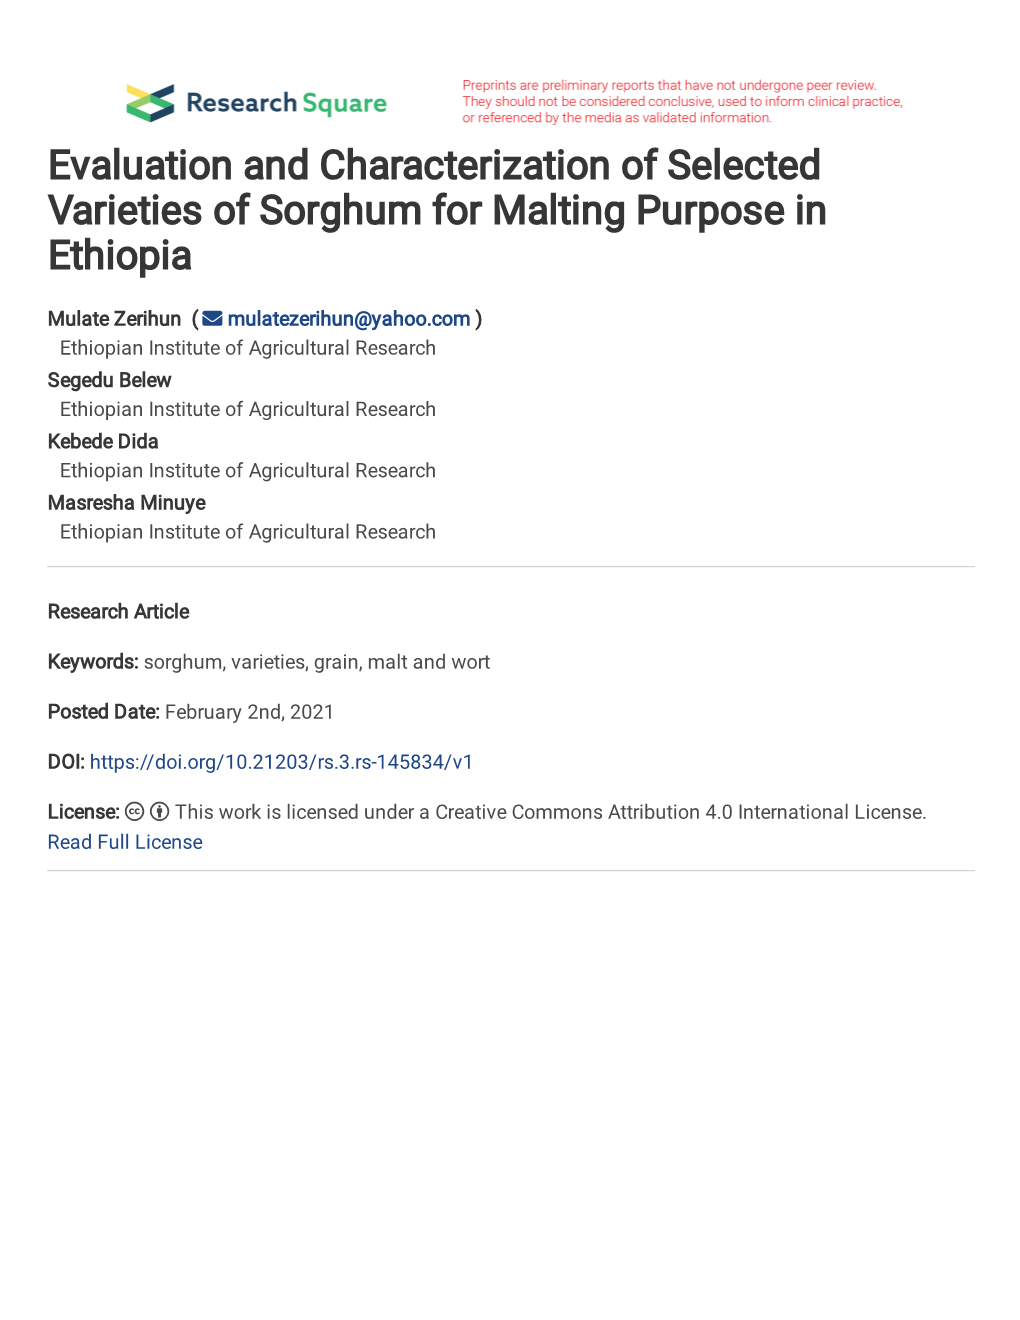 Evaluation and Characterization of Selected Varieties of Sorghum for Malting Purpose in Ethiopia